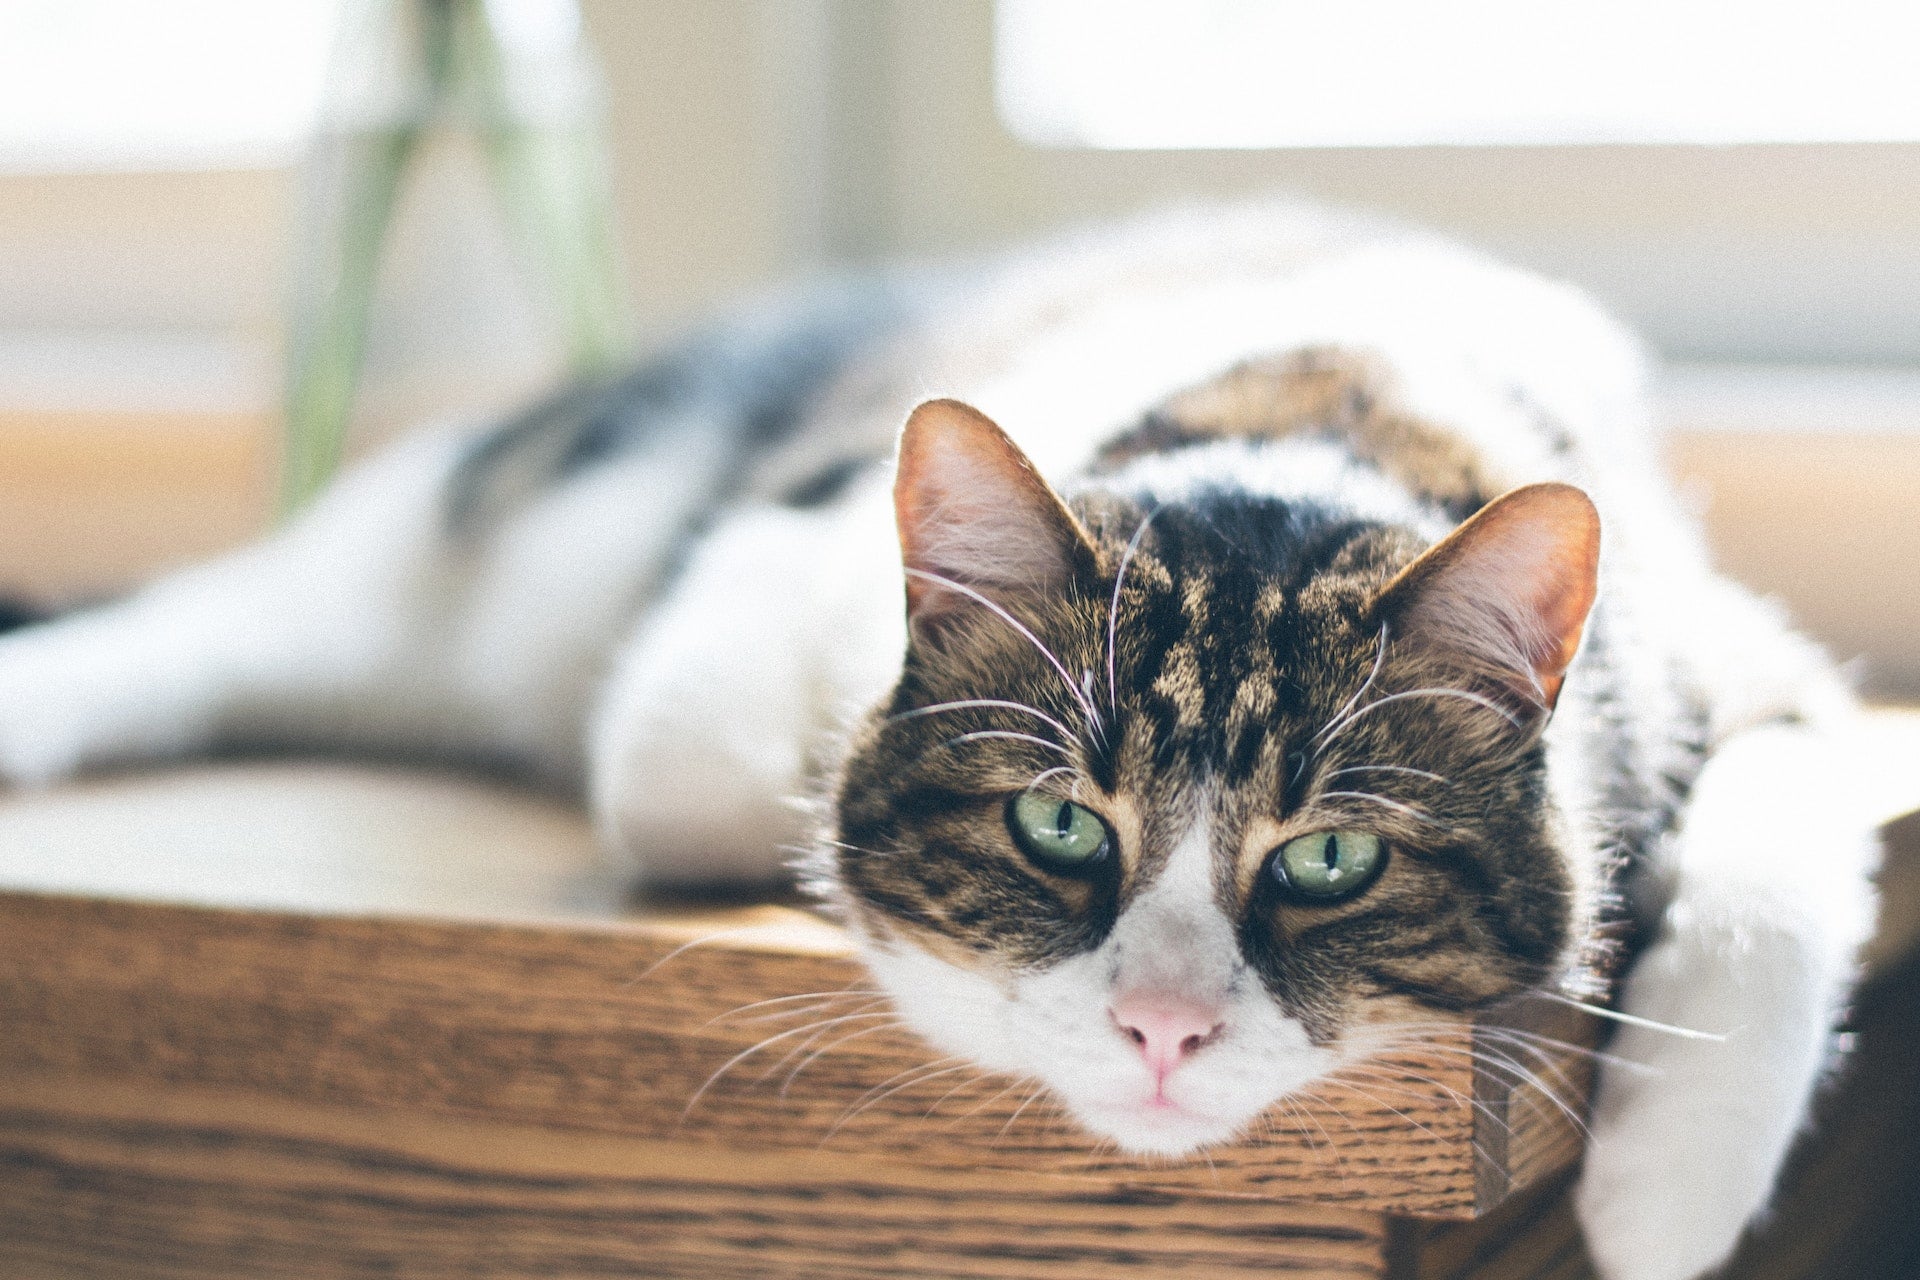 My elderly cat won’t eat – What can I do?